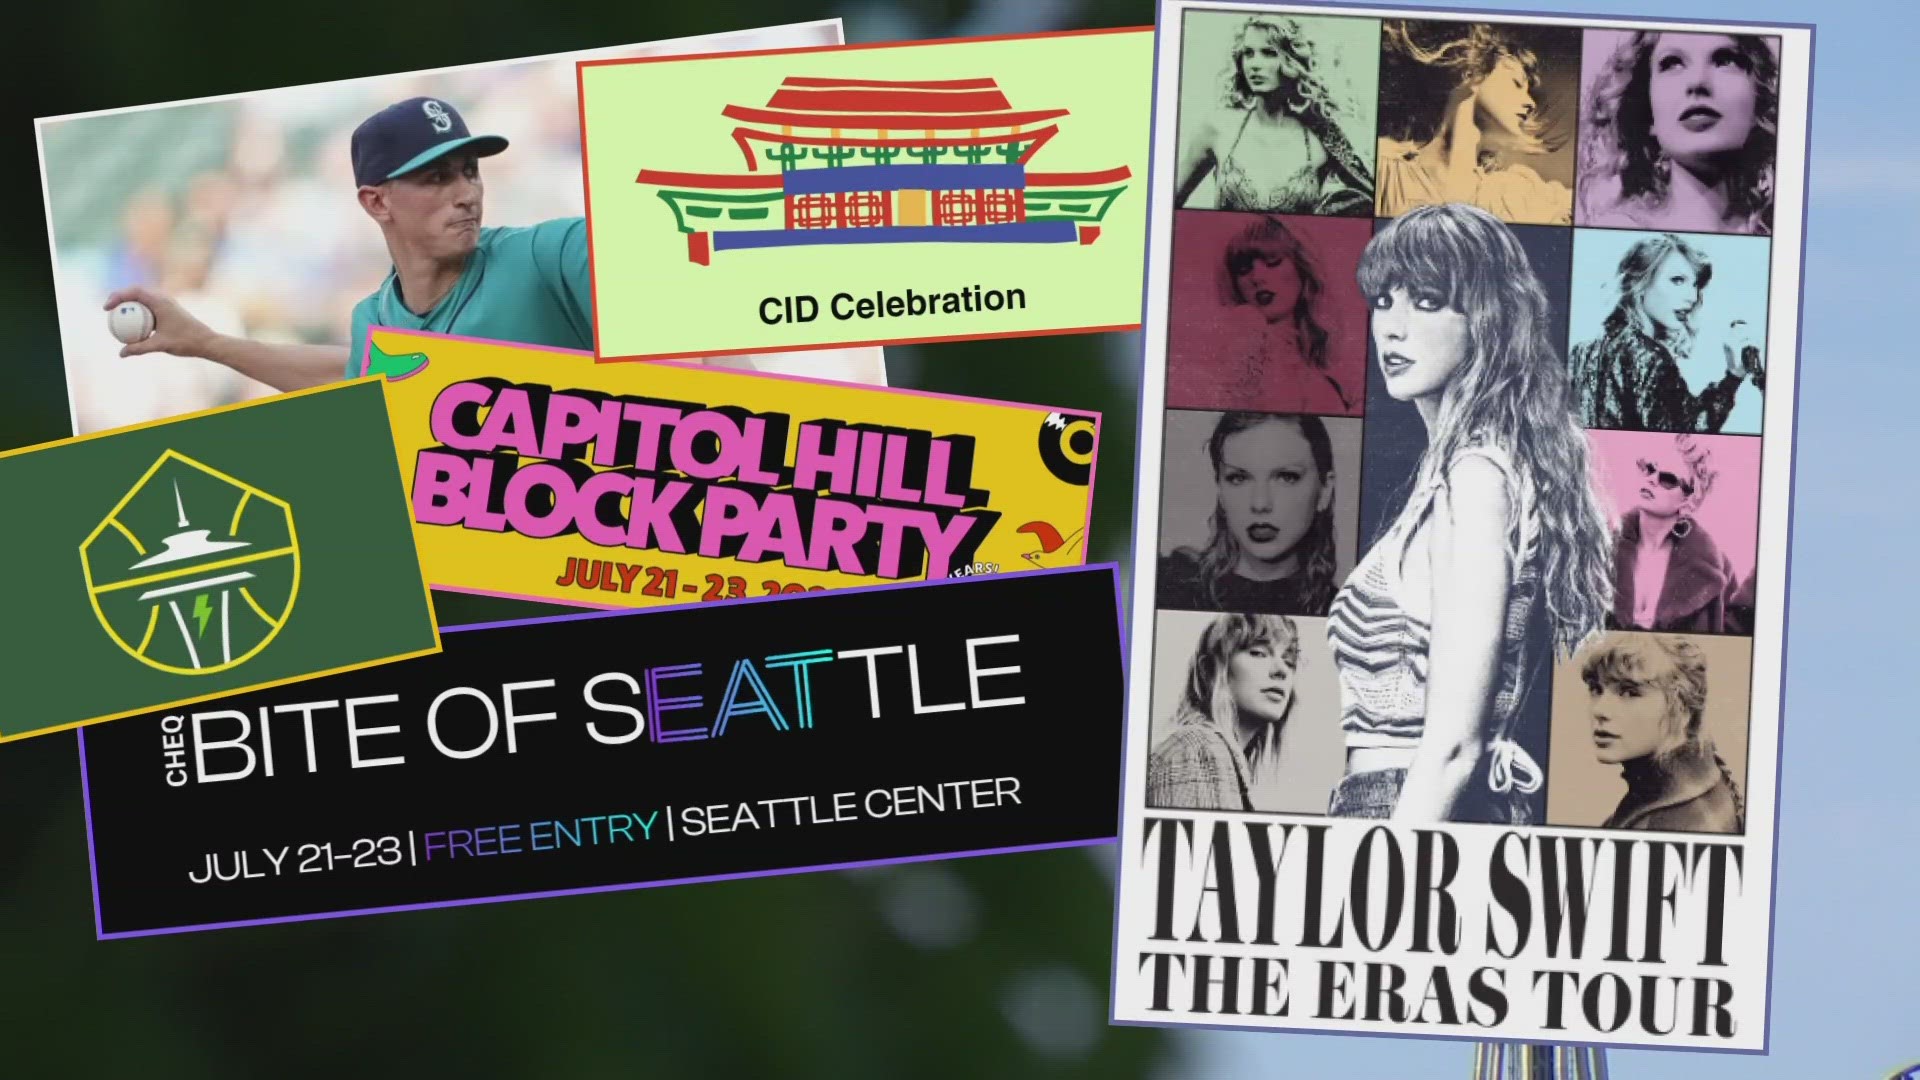 Taylor Swift fans takeover Lumen Field with concerts on Saturday and Sunday. There are also sporting events and the Capitol Hill Block Party this weekend.